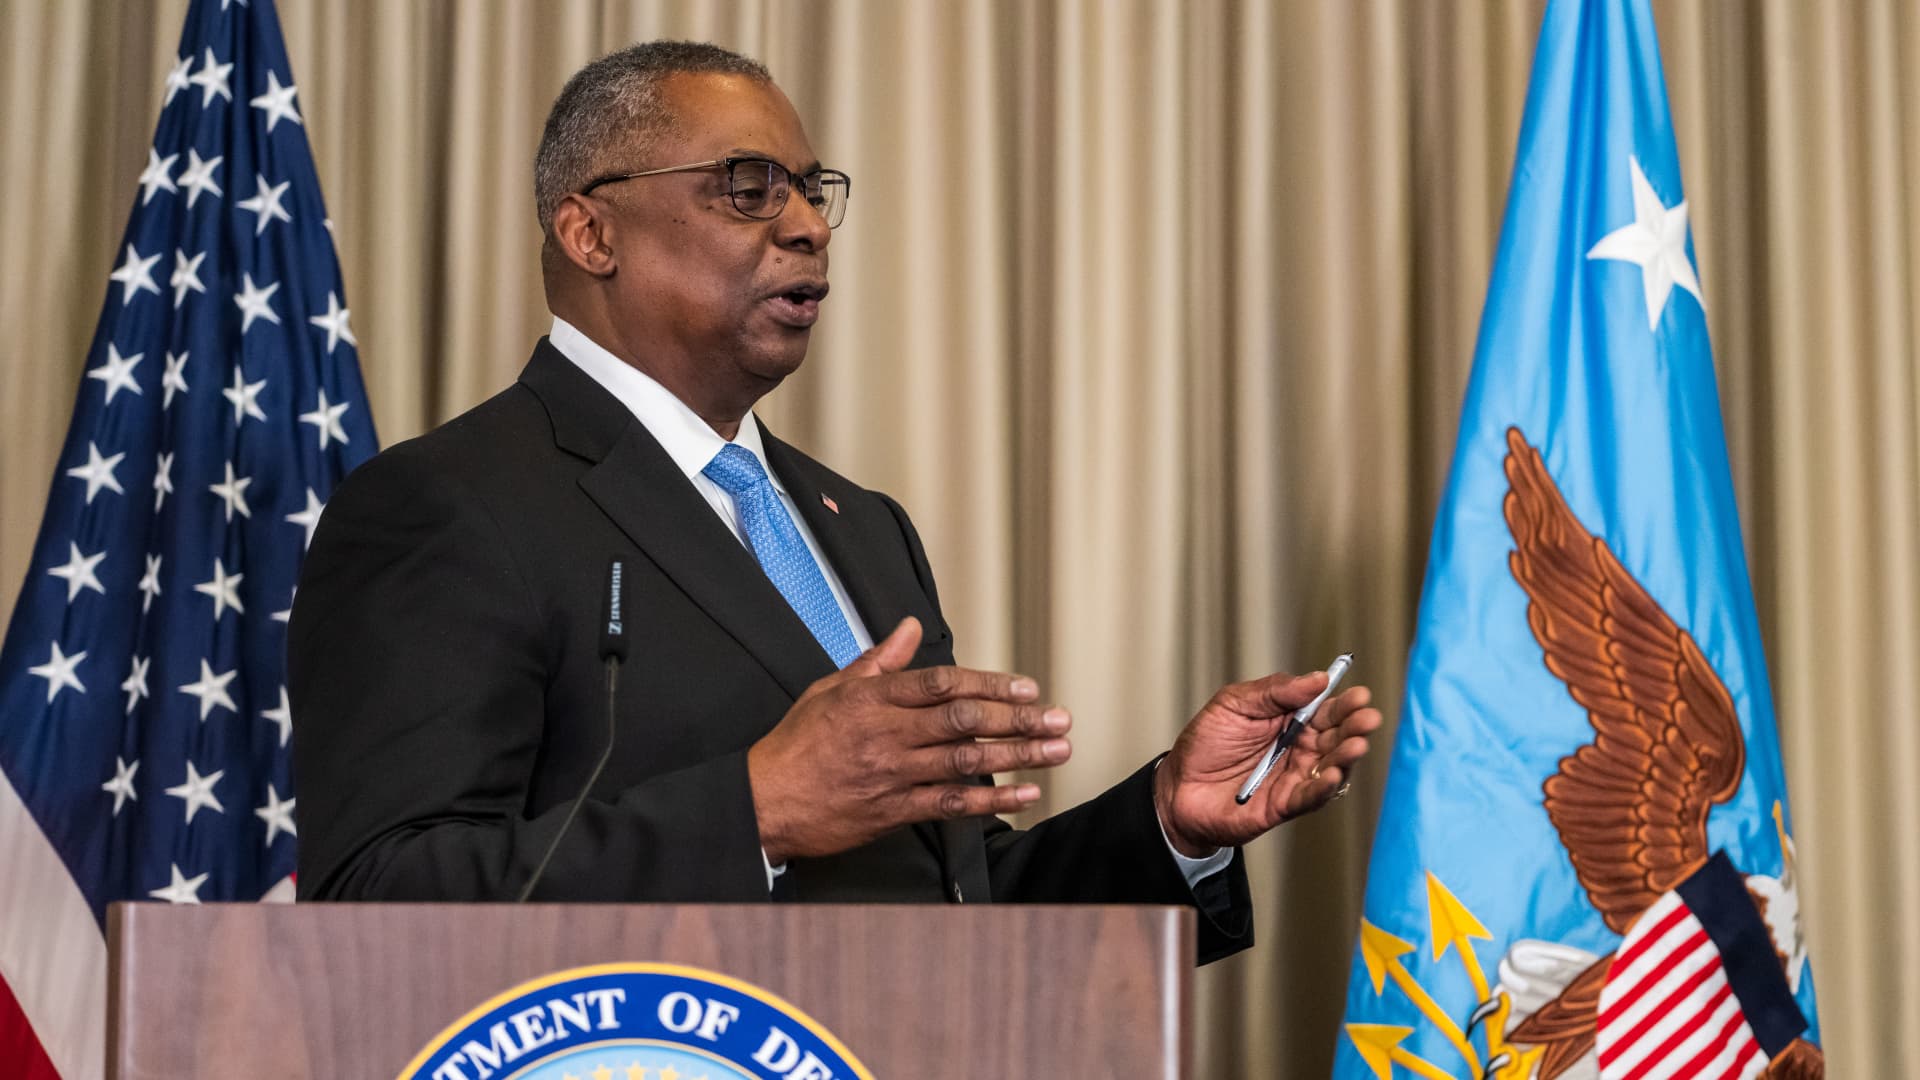 US Defence Secretary Lloyd Austin speaks to the media after the Ukraine Security Consultative Group meeting at Ramstein air base on April 26, 2022 in Ramstein-Miesenbach, Germany. The meeting is a U.S.